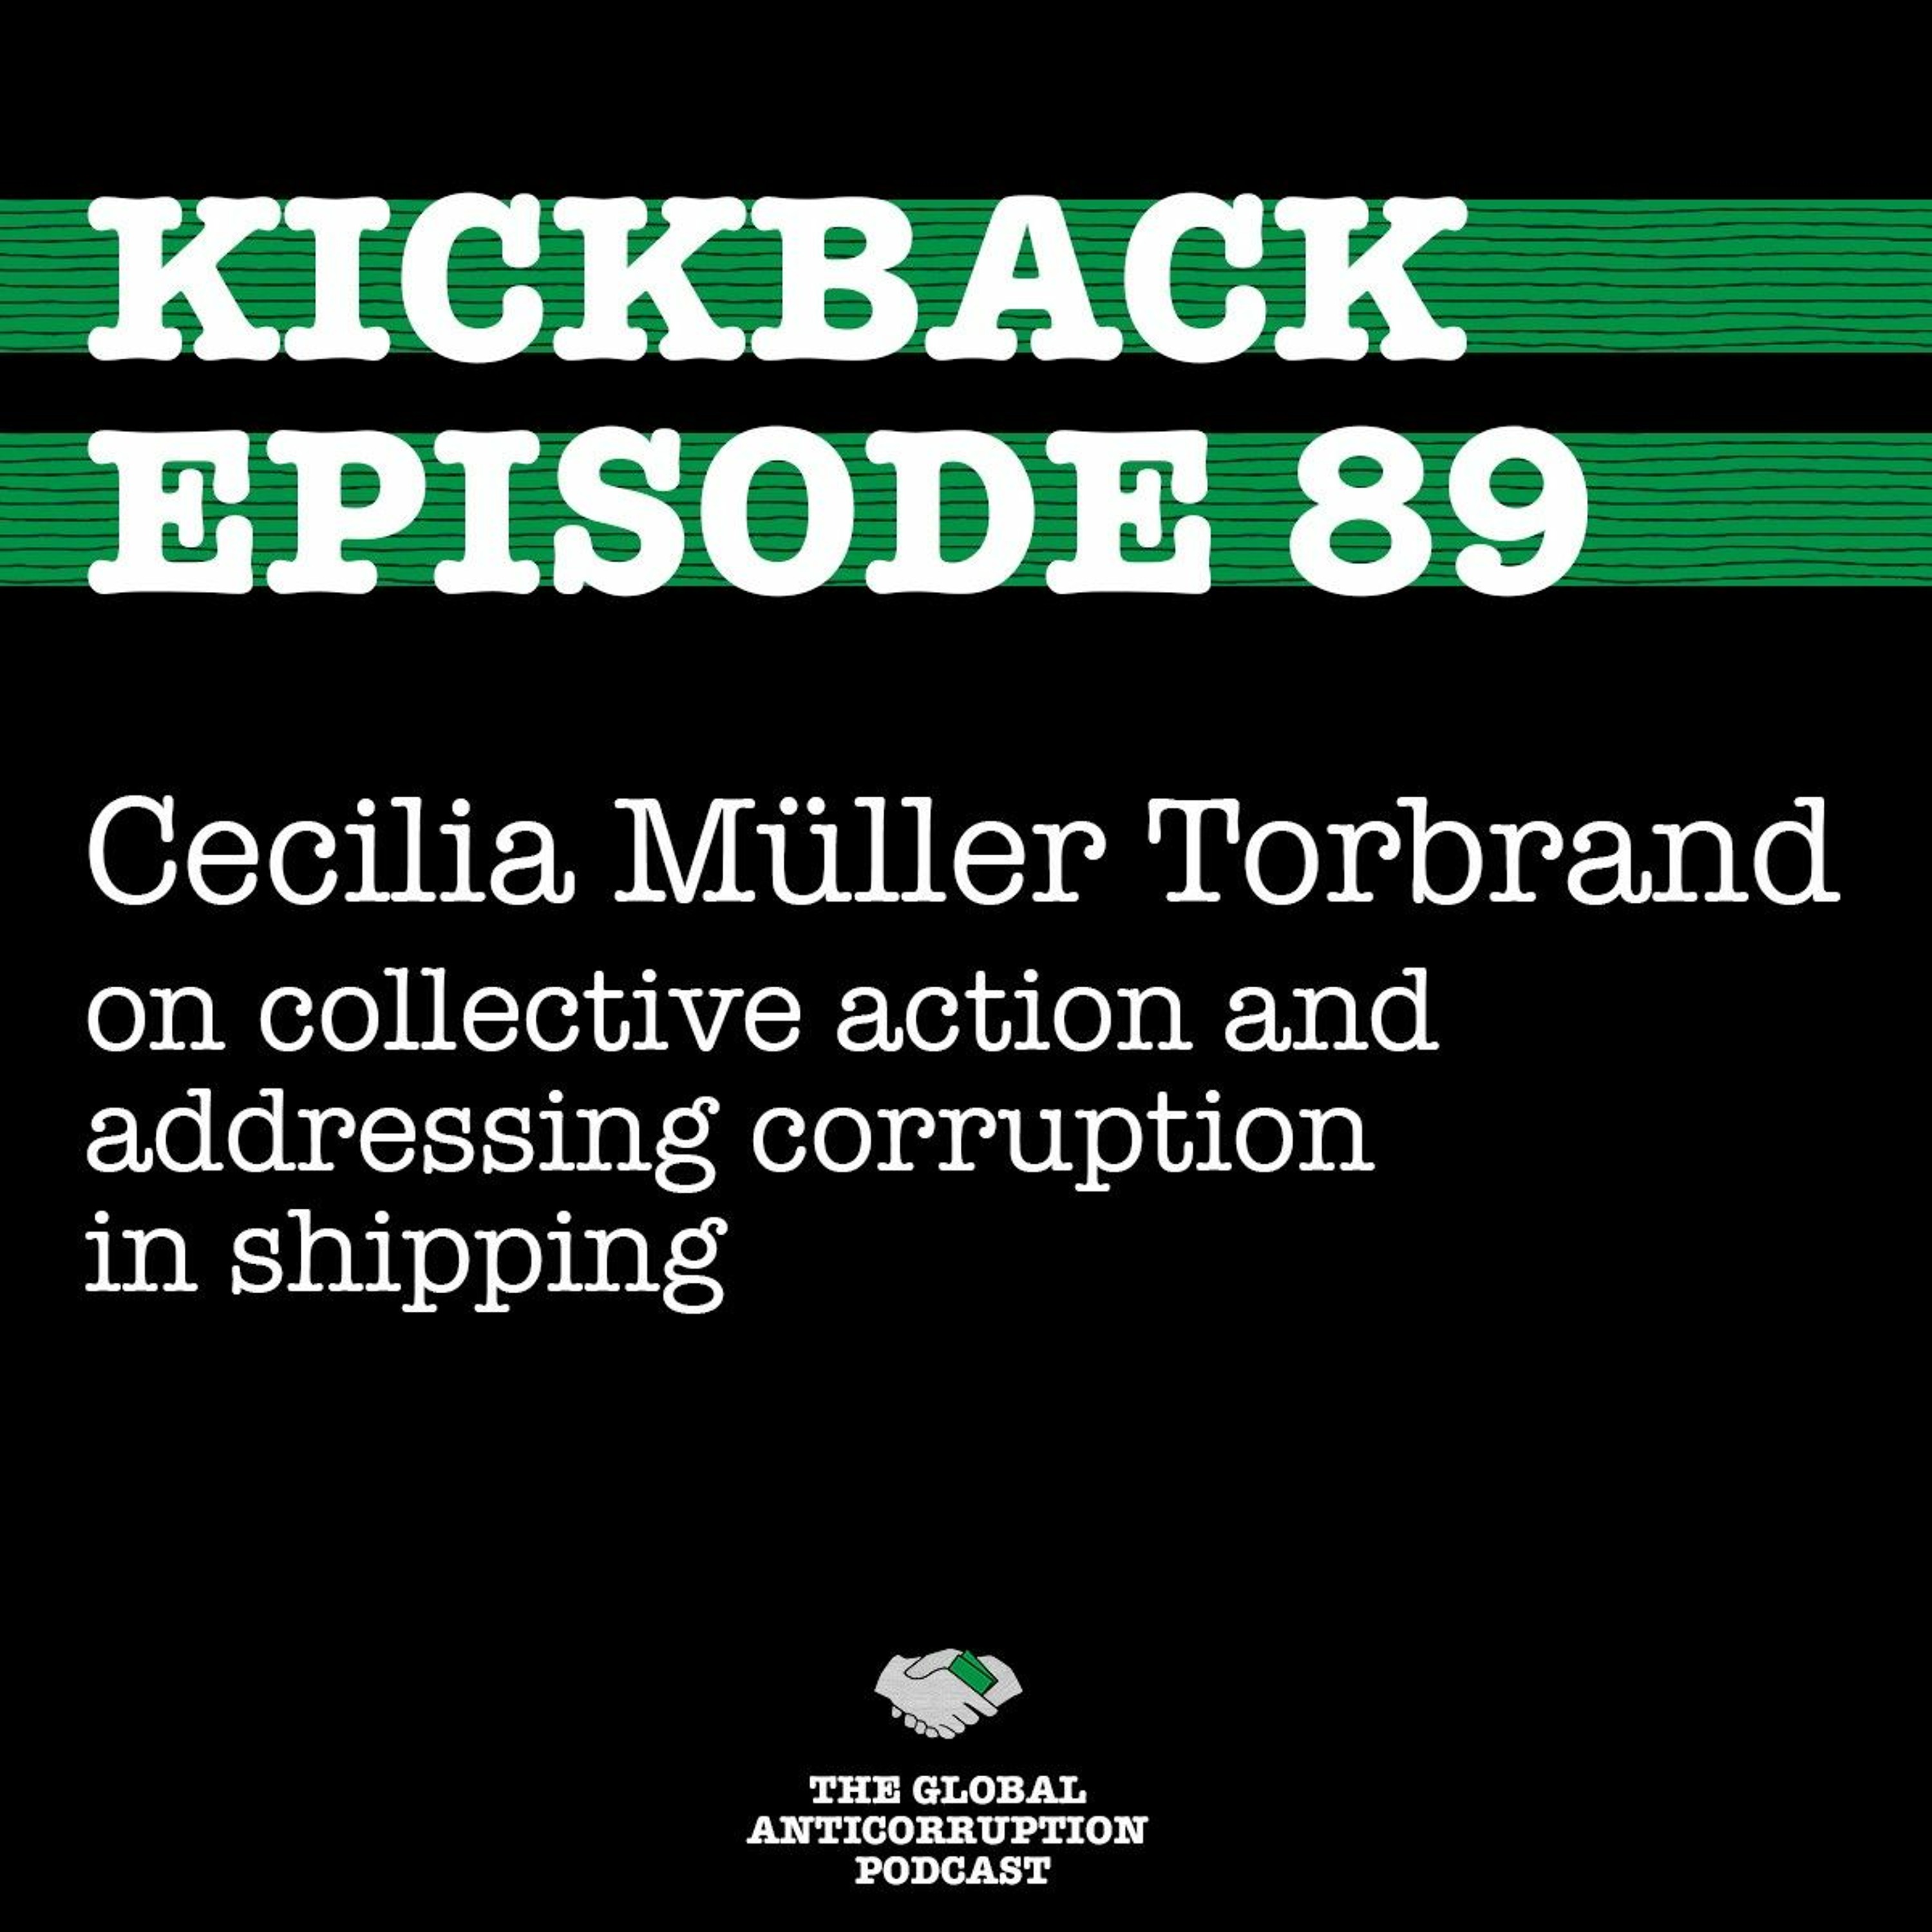 Episode 89. Cecilia Müller Torbrand on collective action and addressing corruption in shipping